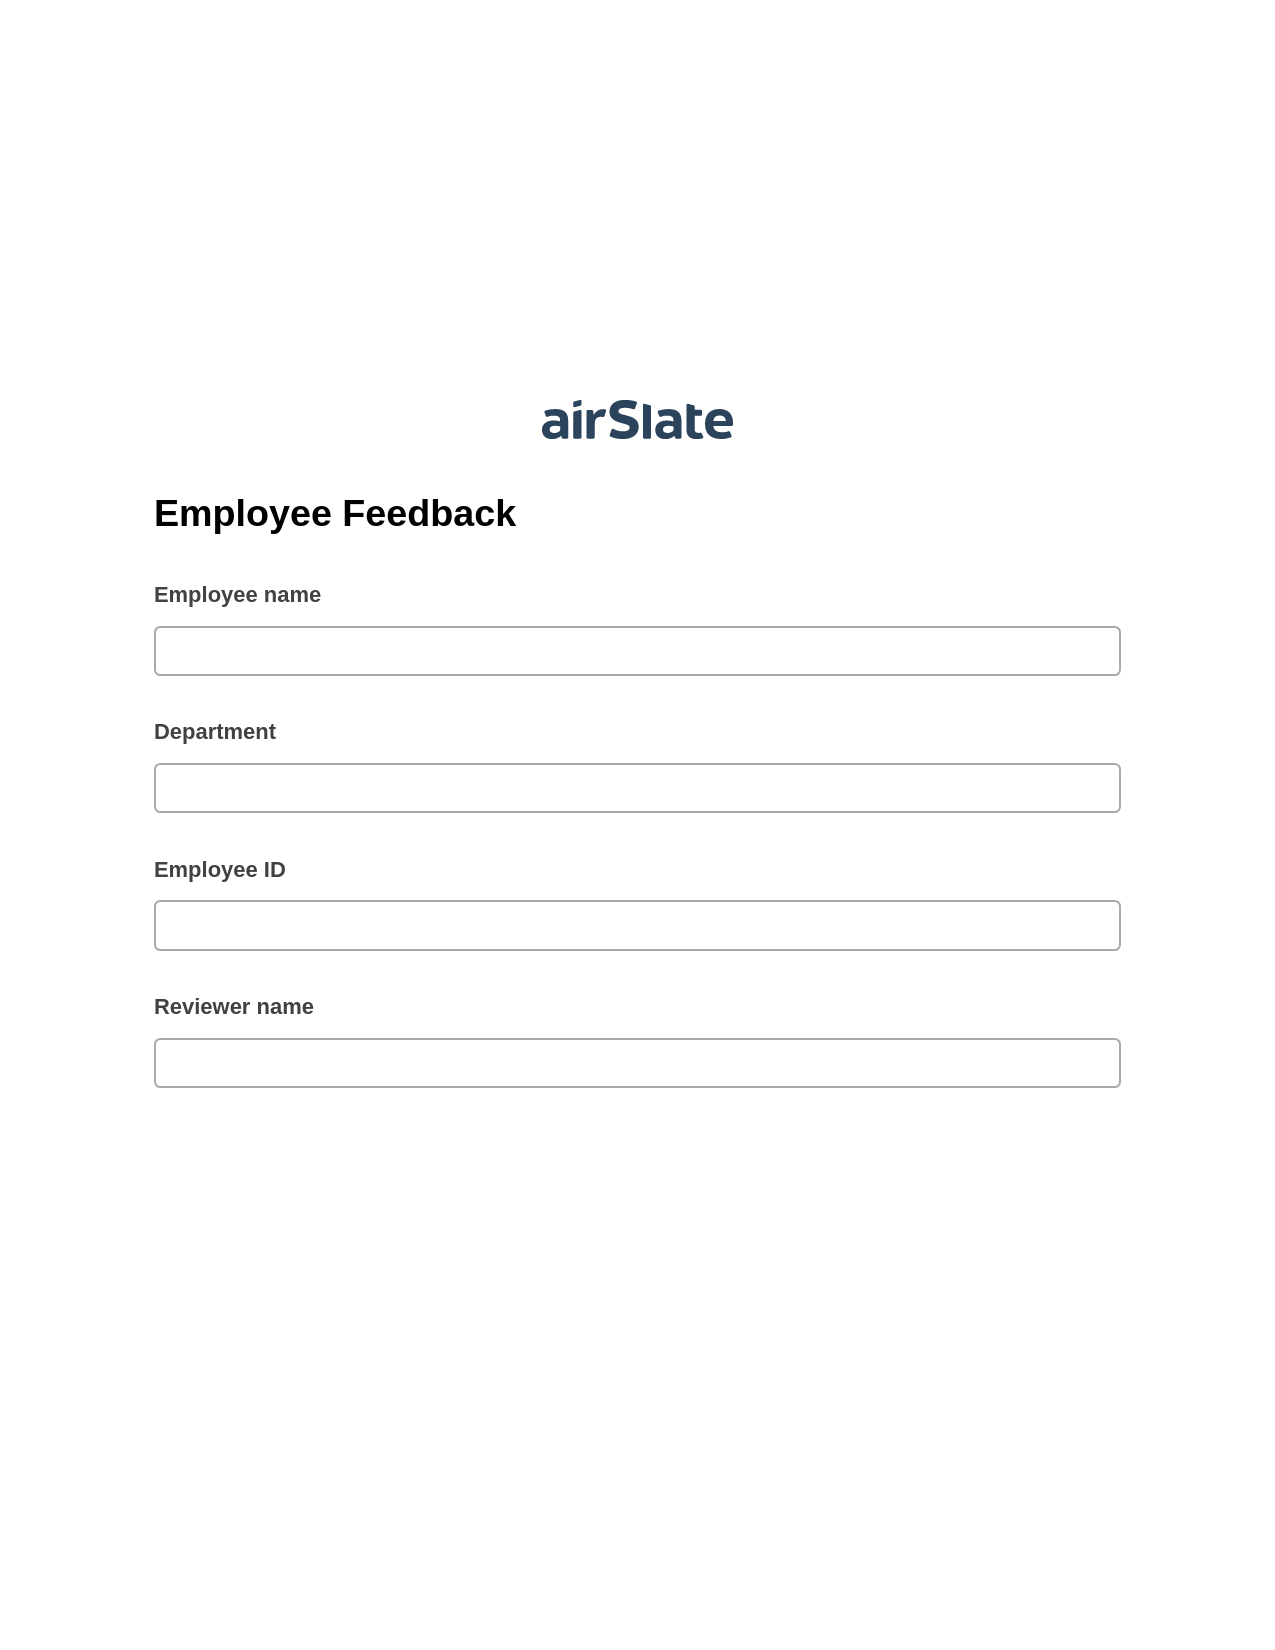 Employee Feedback Pre-fill Slate from MS Dynamics 365 Records Bot, Roles Reminder Bot, Slack Two-Way Binding Bot